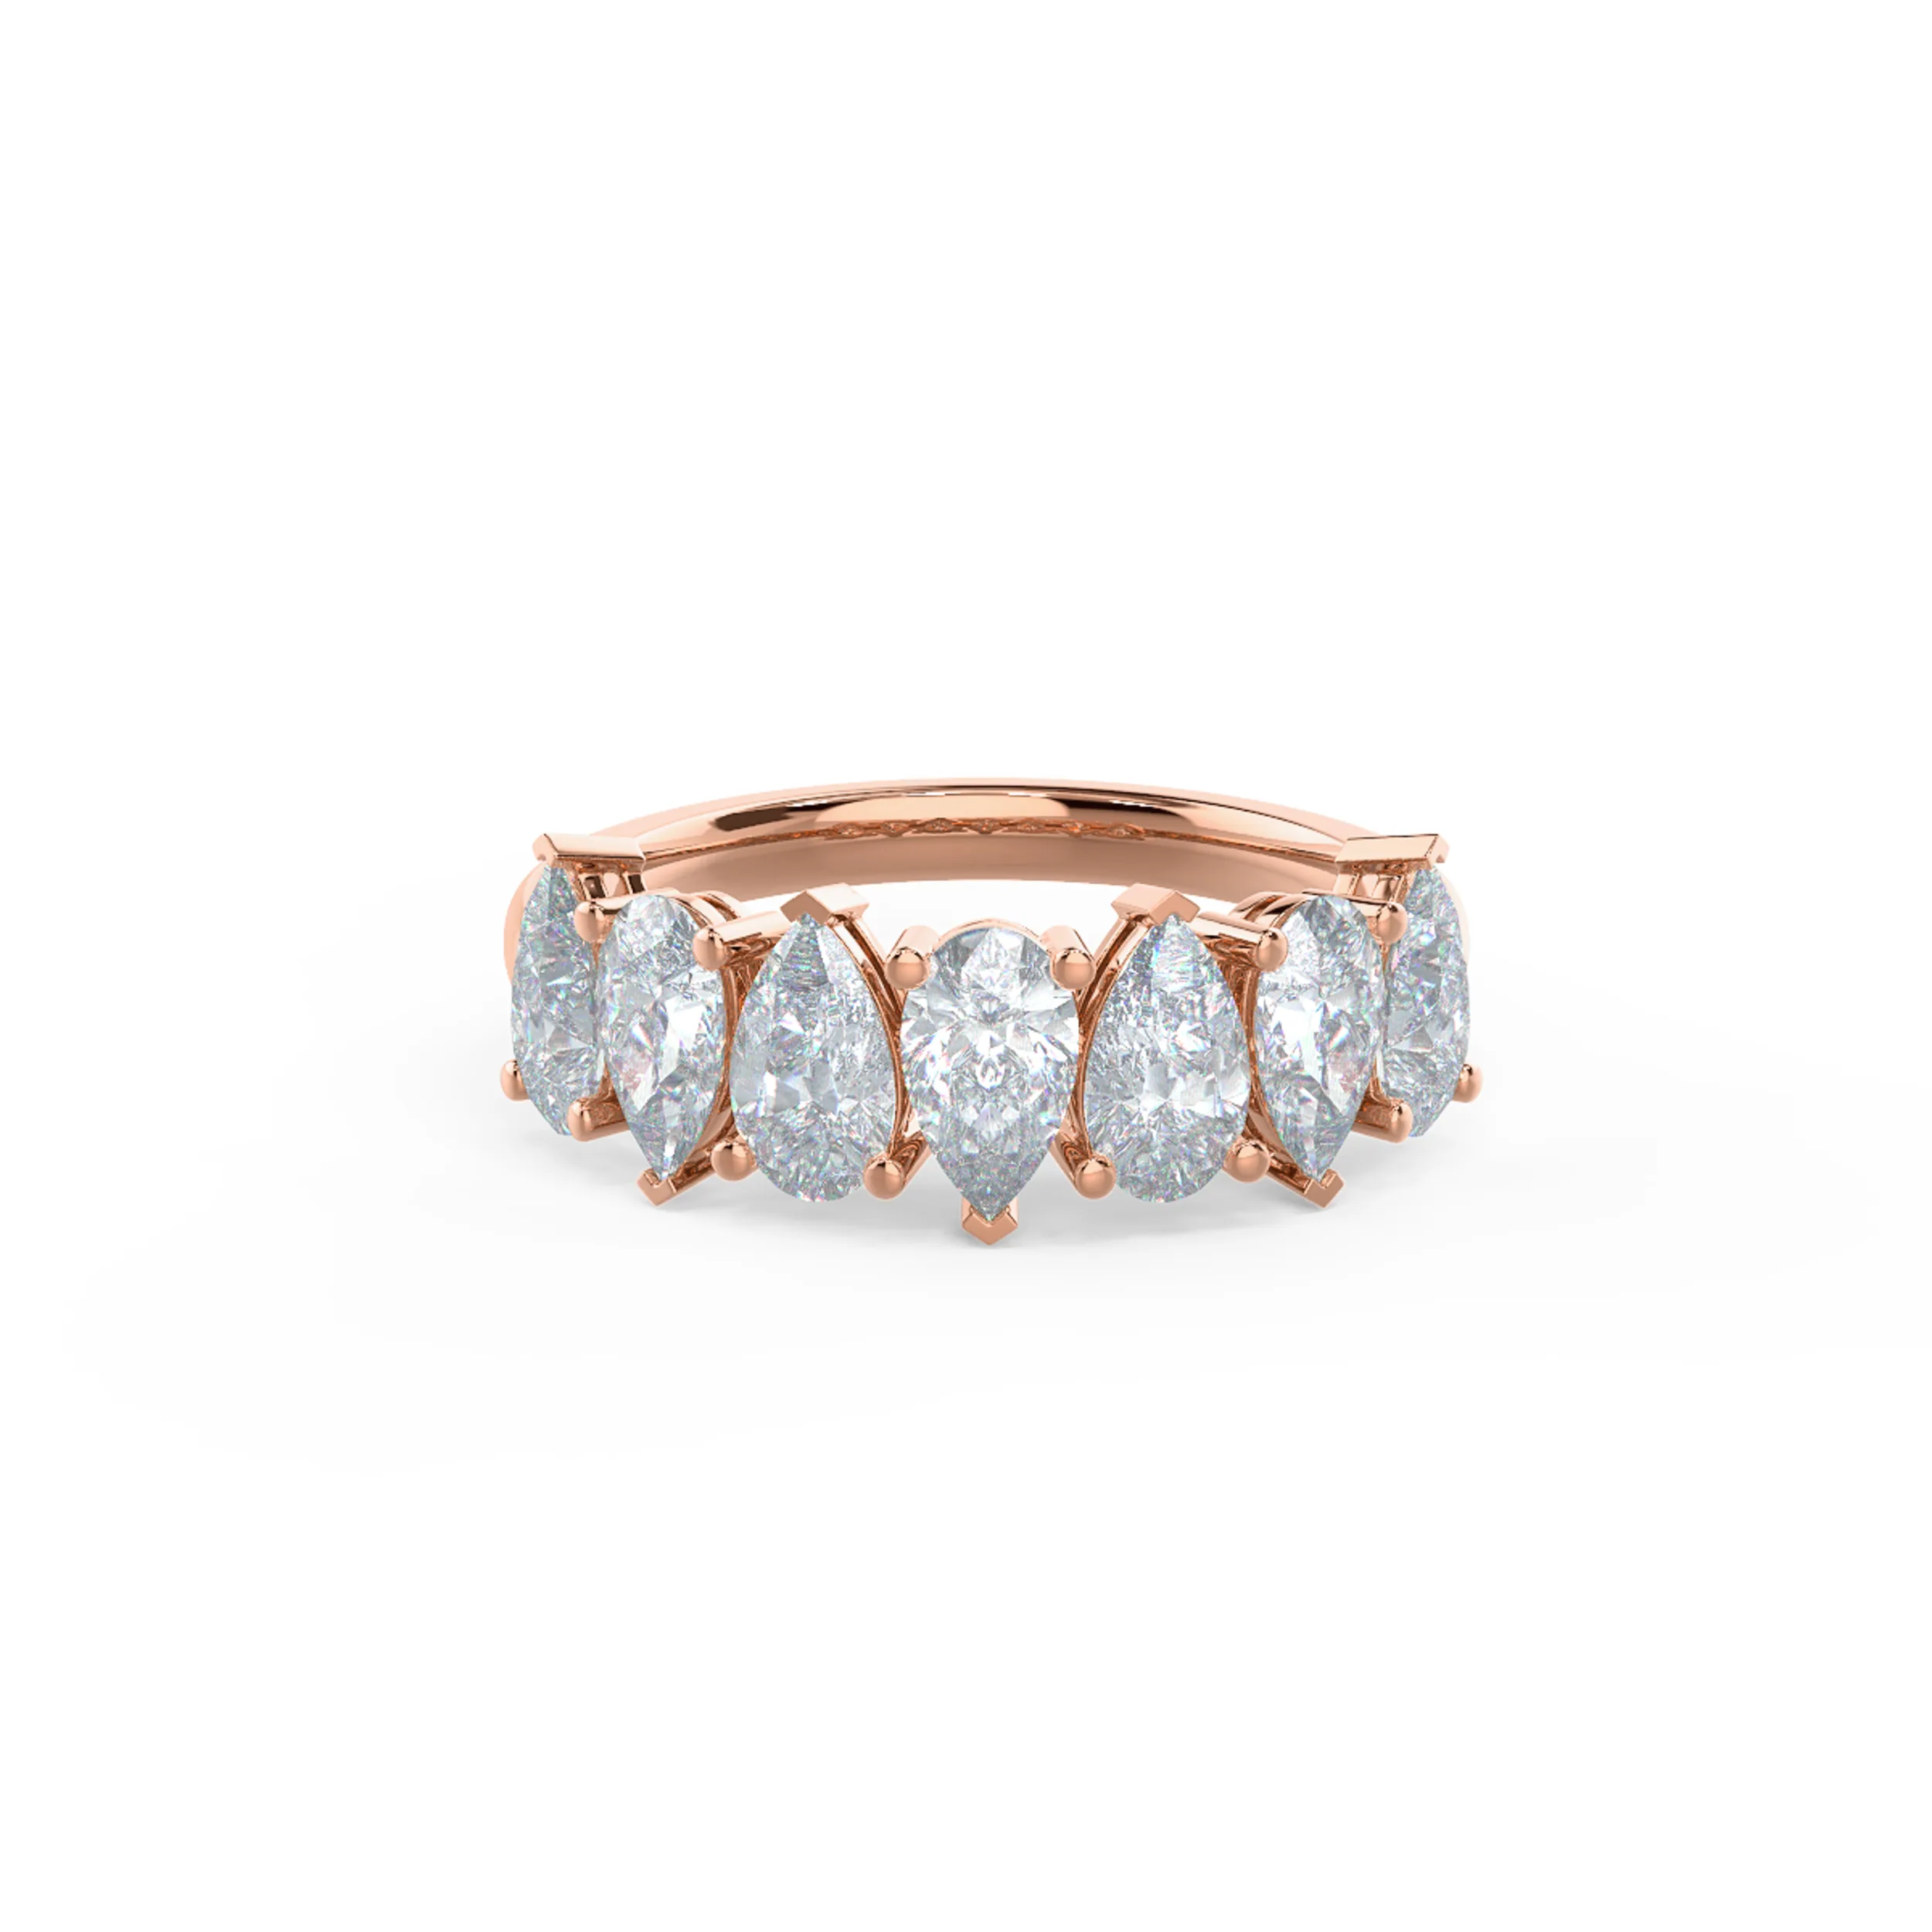 Exceptional Quality 2.0 ct Lab Created Diamonds set in 14k Rose Gold Pear Alternating Seven Stone (Main View)